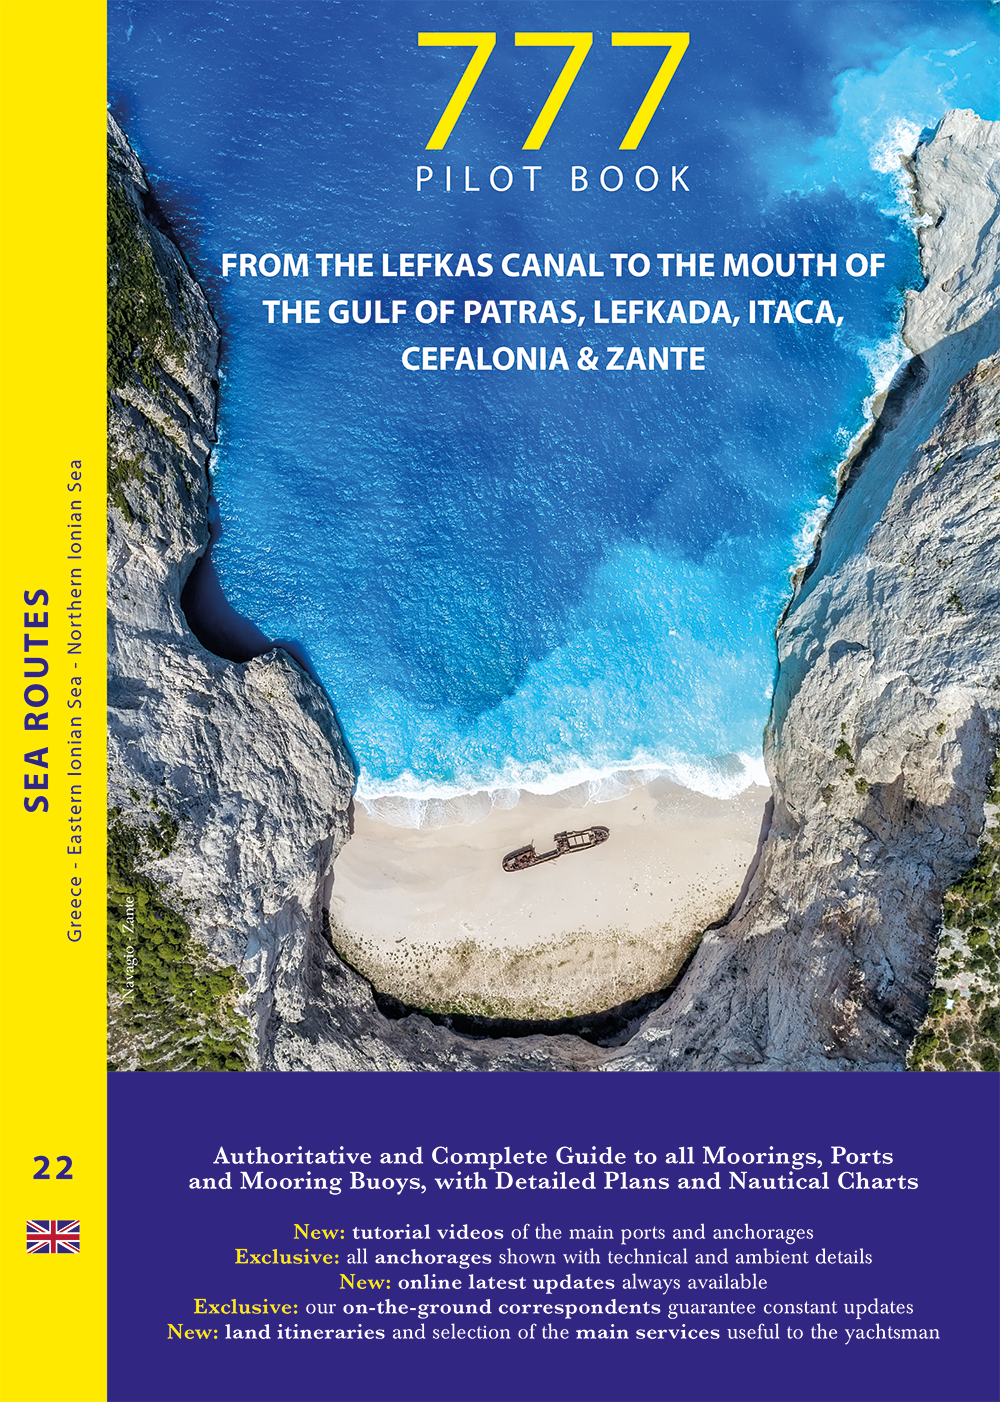 777 Pilot book from the Lefkas Canal to the mouth of the Gulf of Patras